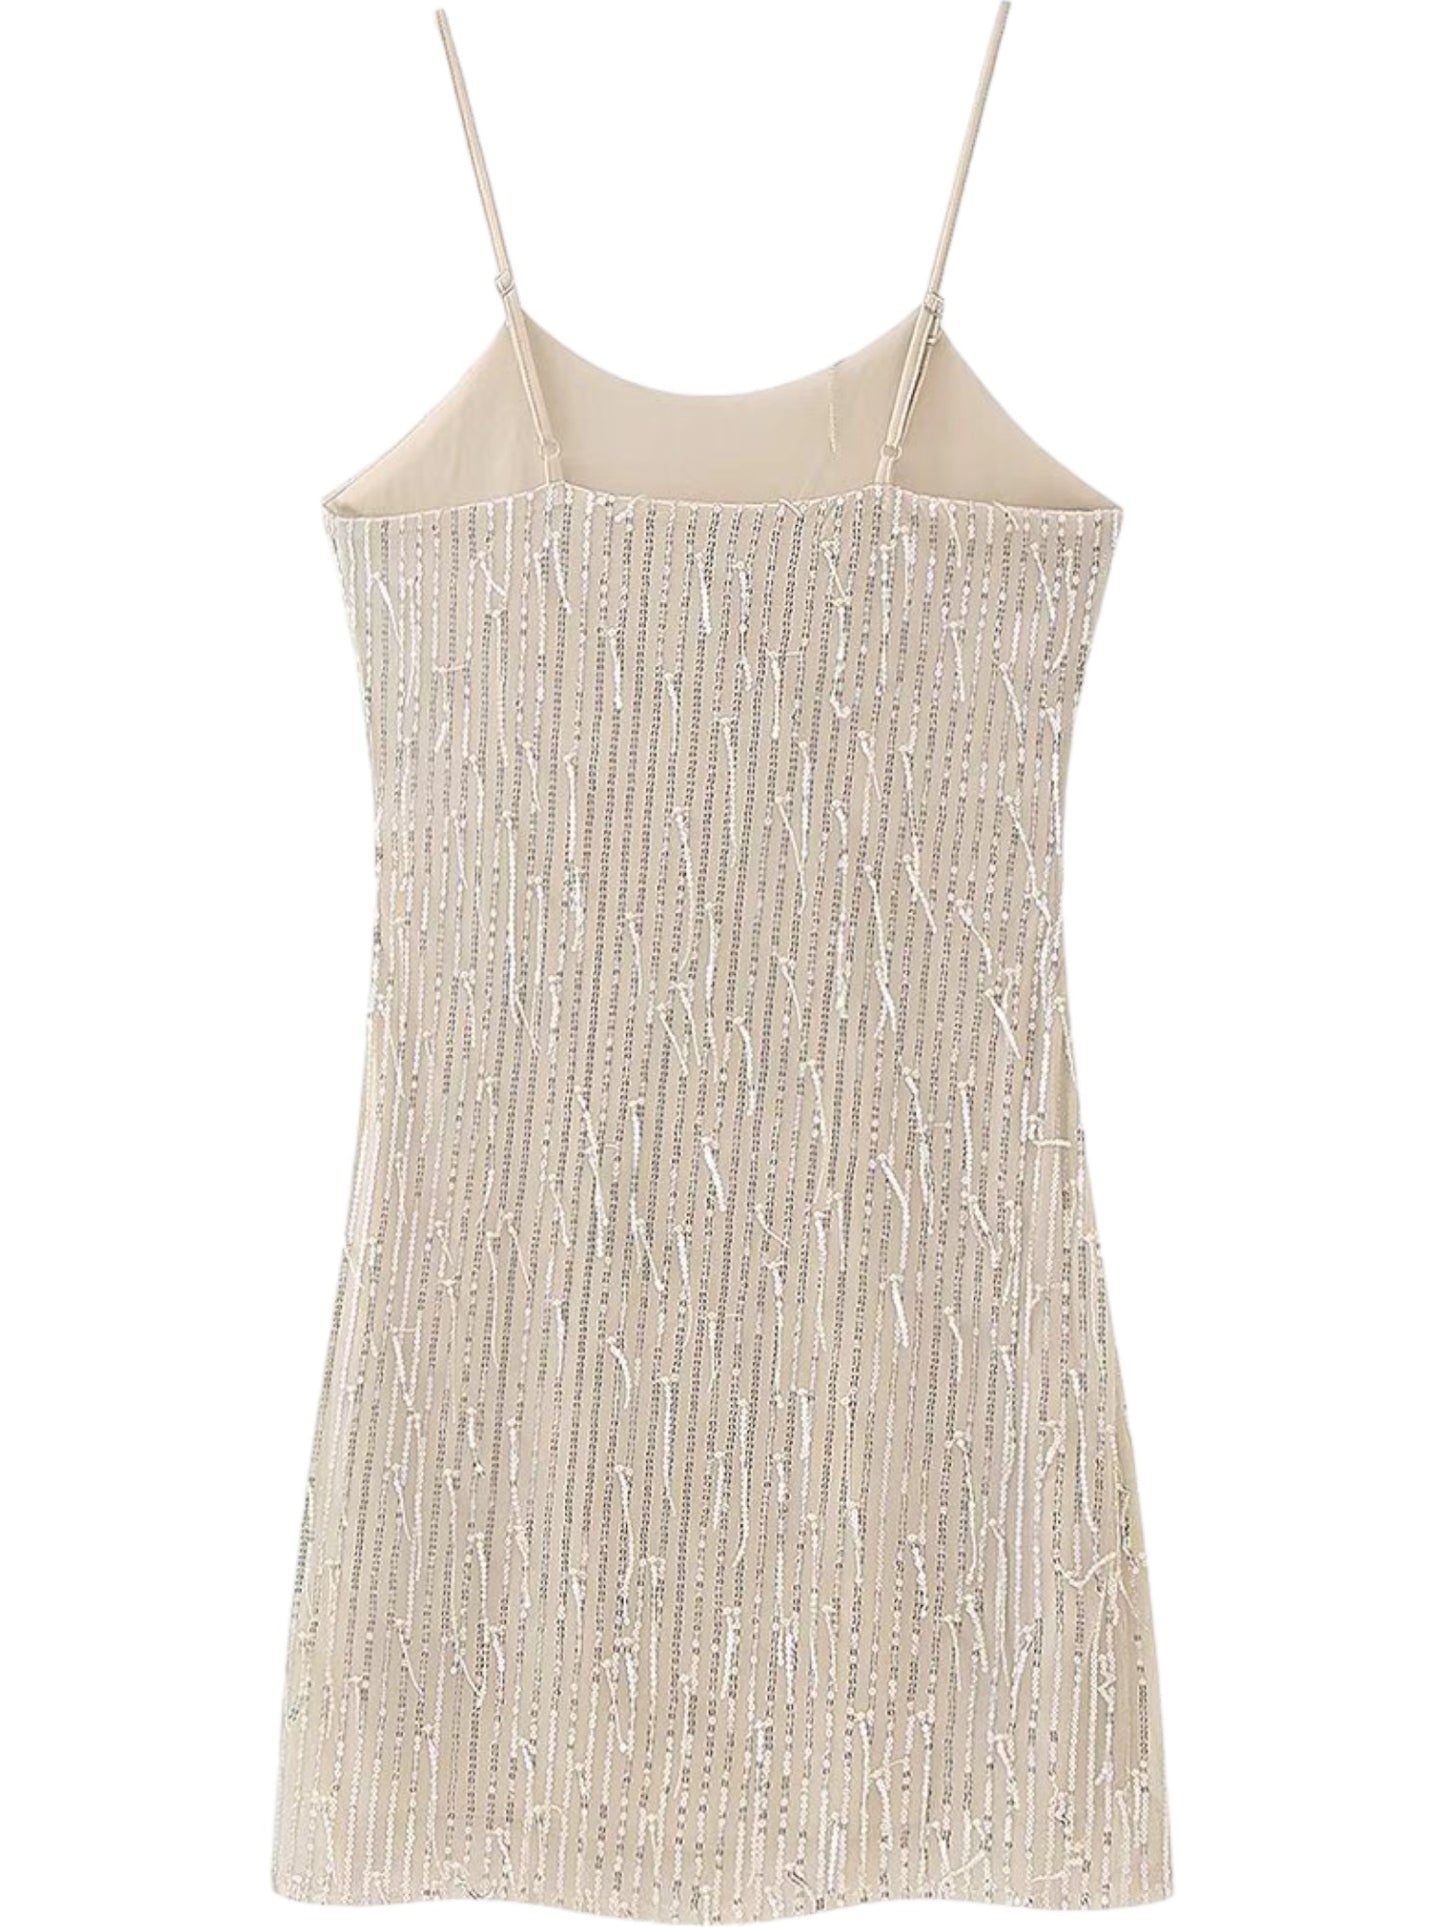 Dangly Sequin Cami Top Fitted Tunic Party Club Dress